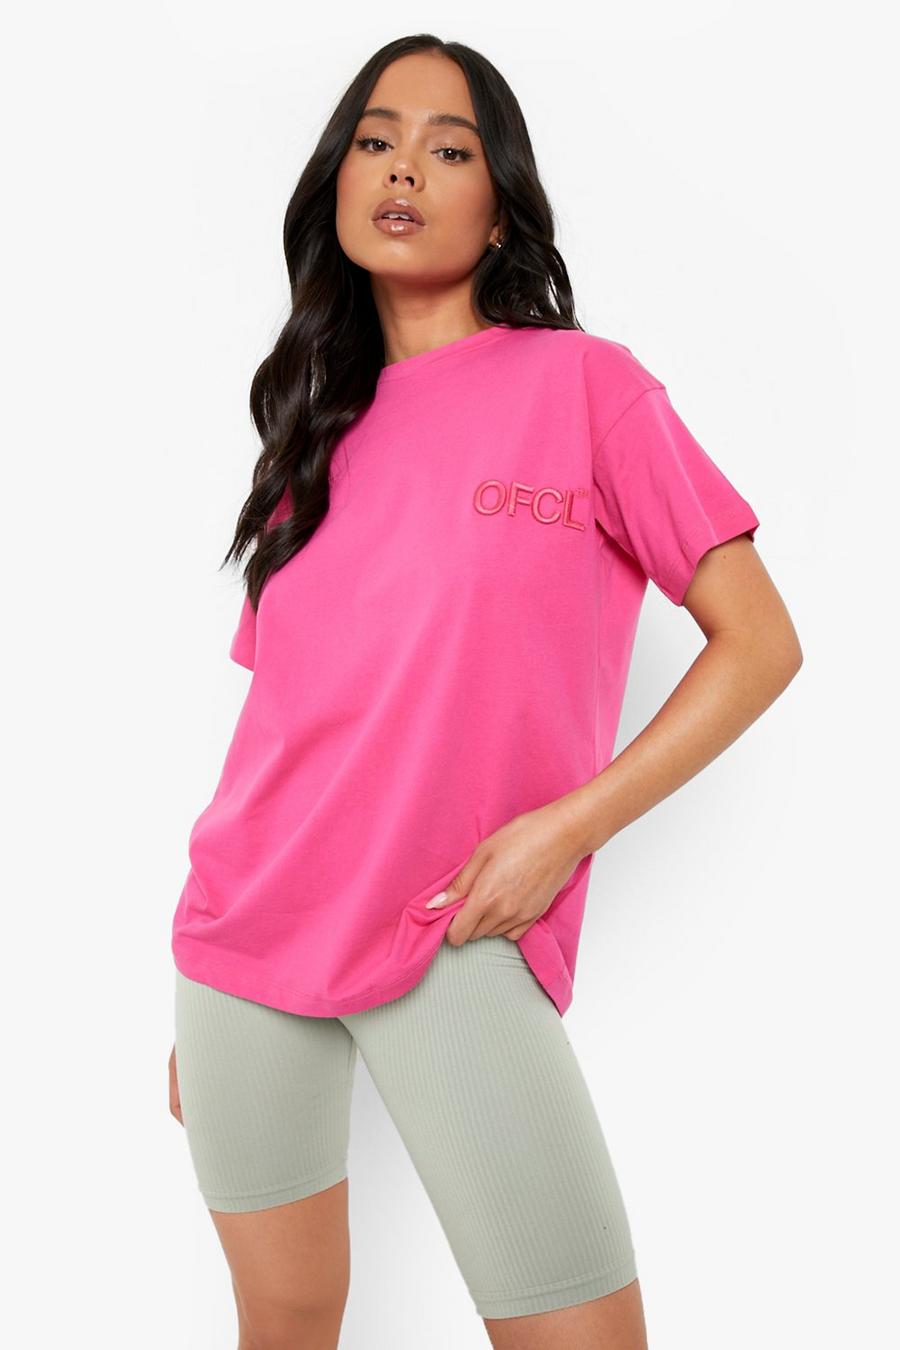 Hot pink Petite Ofcl Embroidered T-shirt